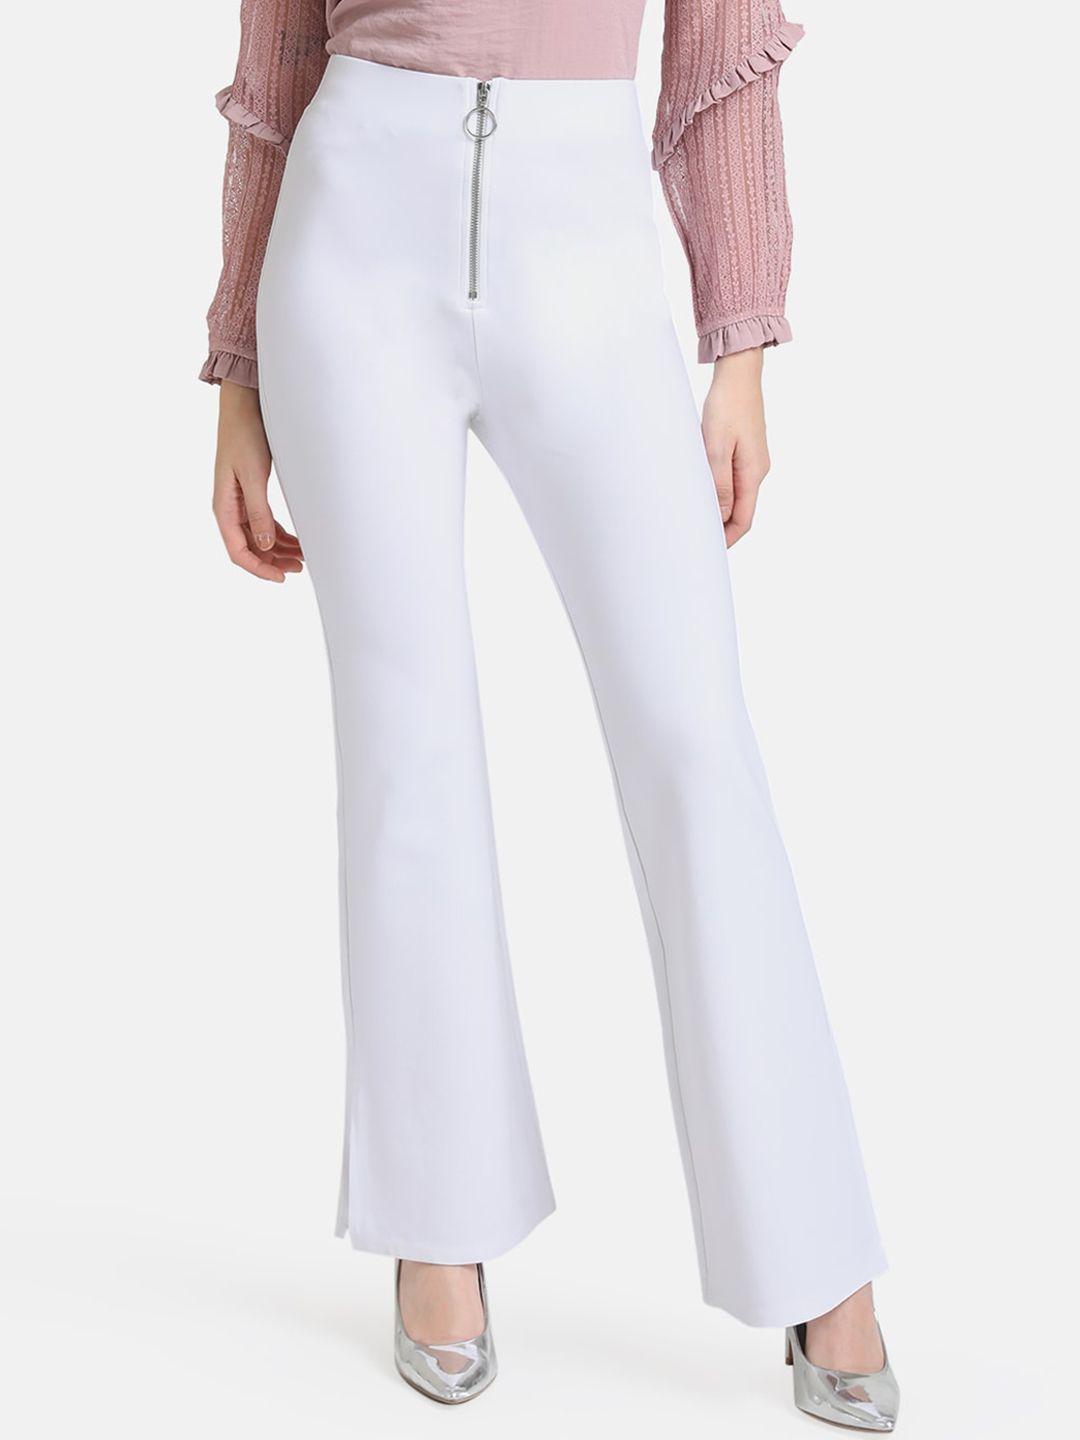 kazo-women-white-flared-low-rise-front-zipper-detailed-trousers